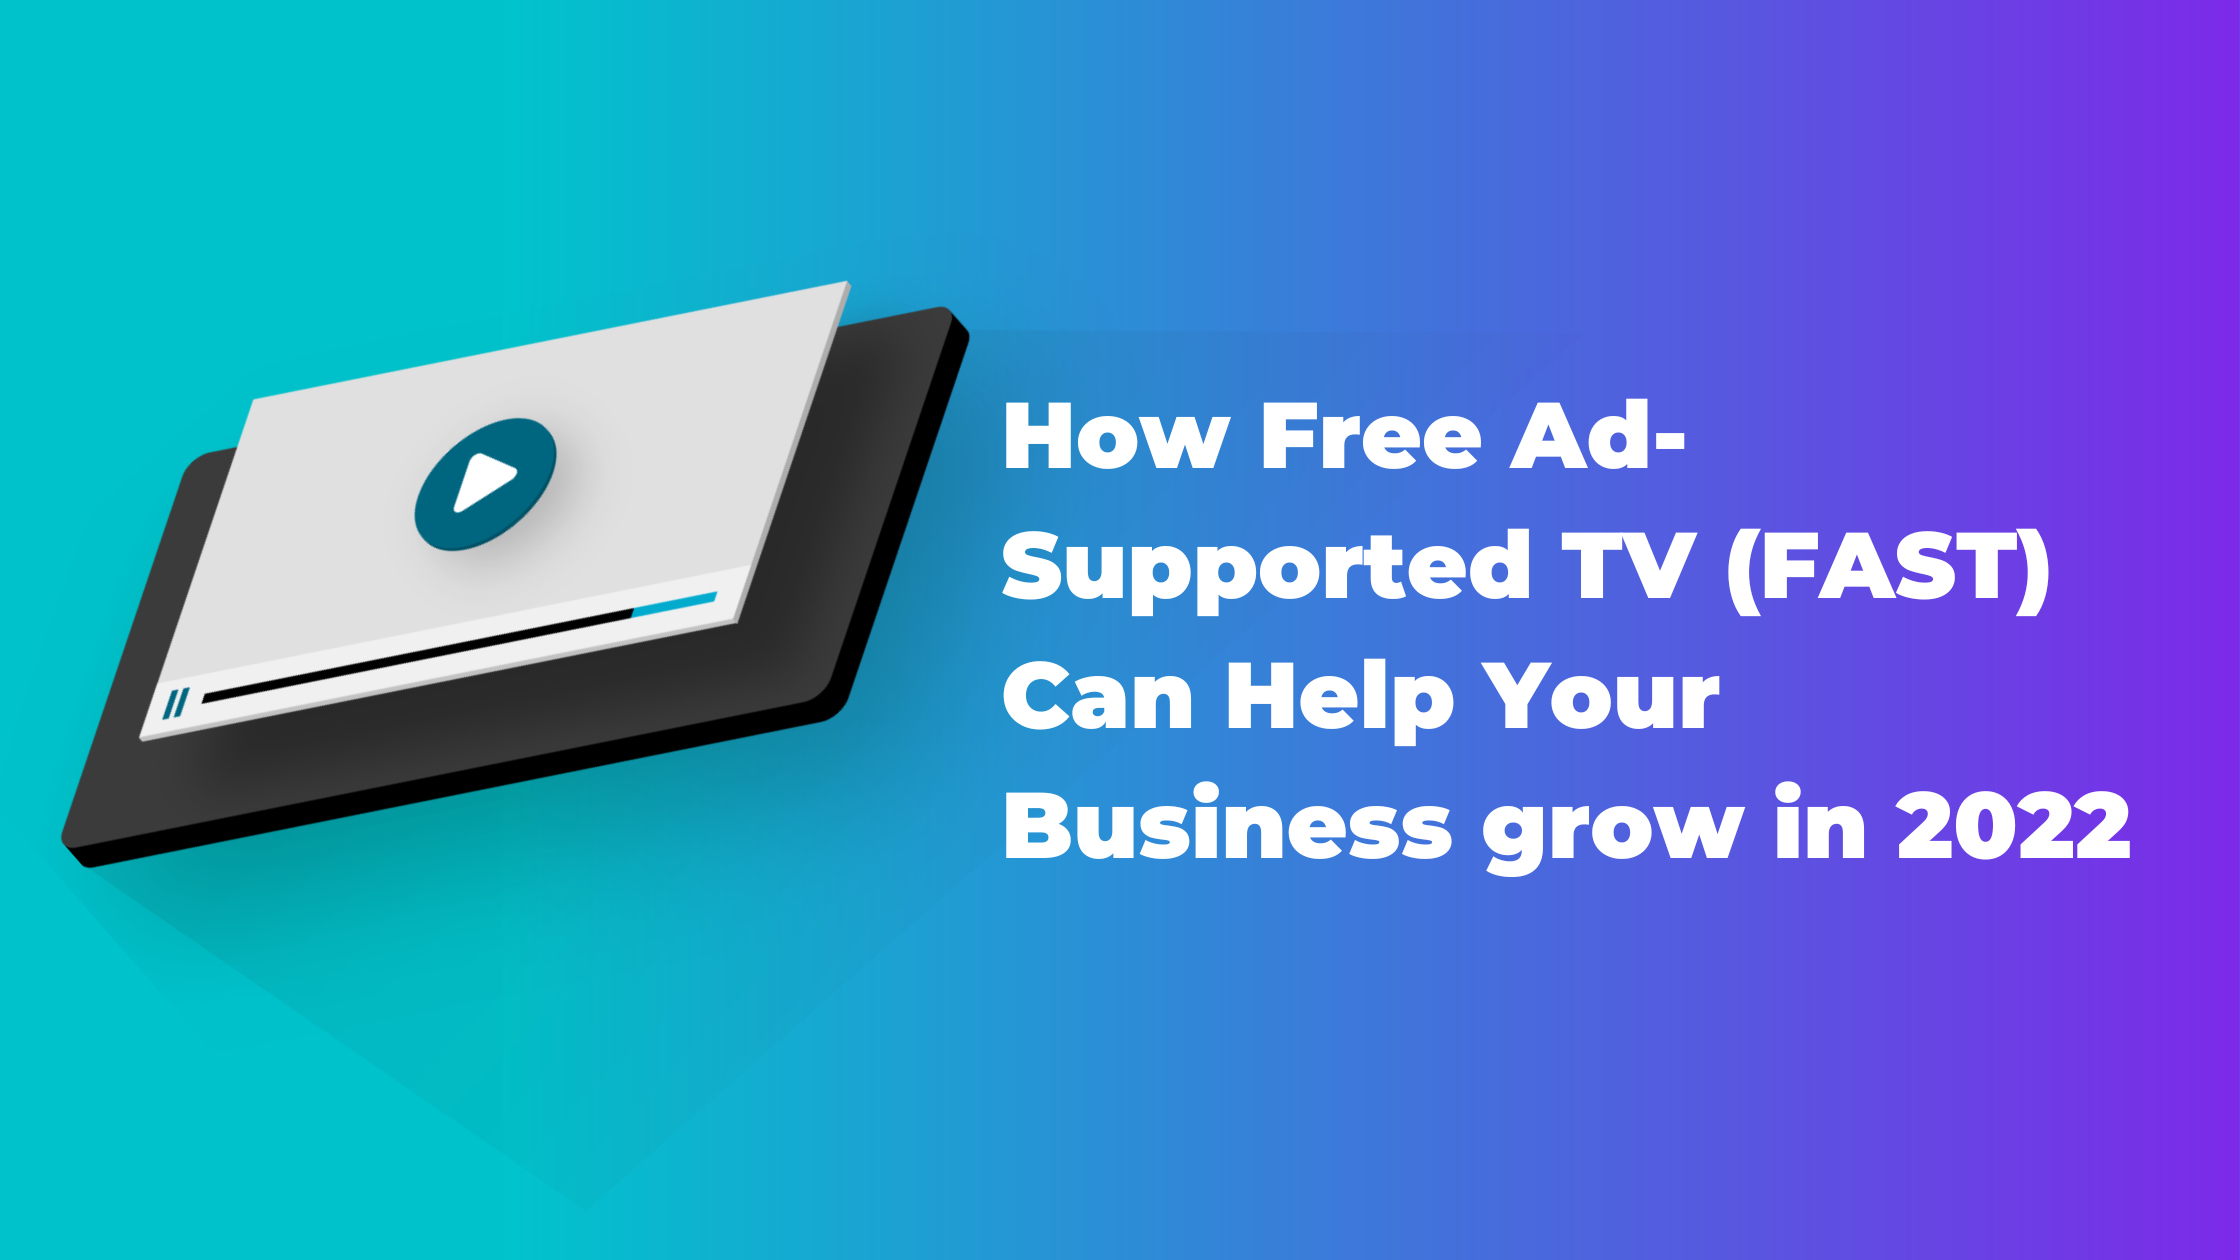 How Free Ad-Supported TV (FAST) Can Help Your Business Grow in 2022